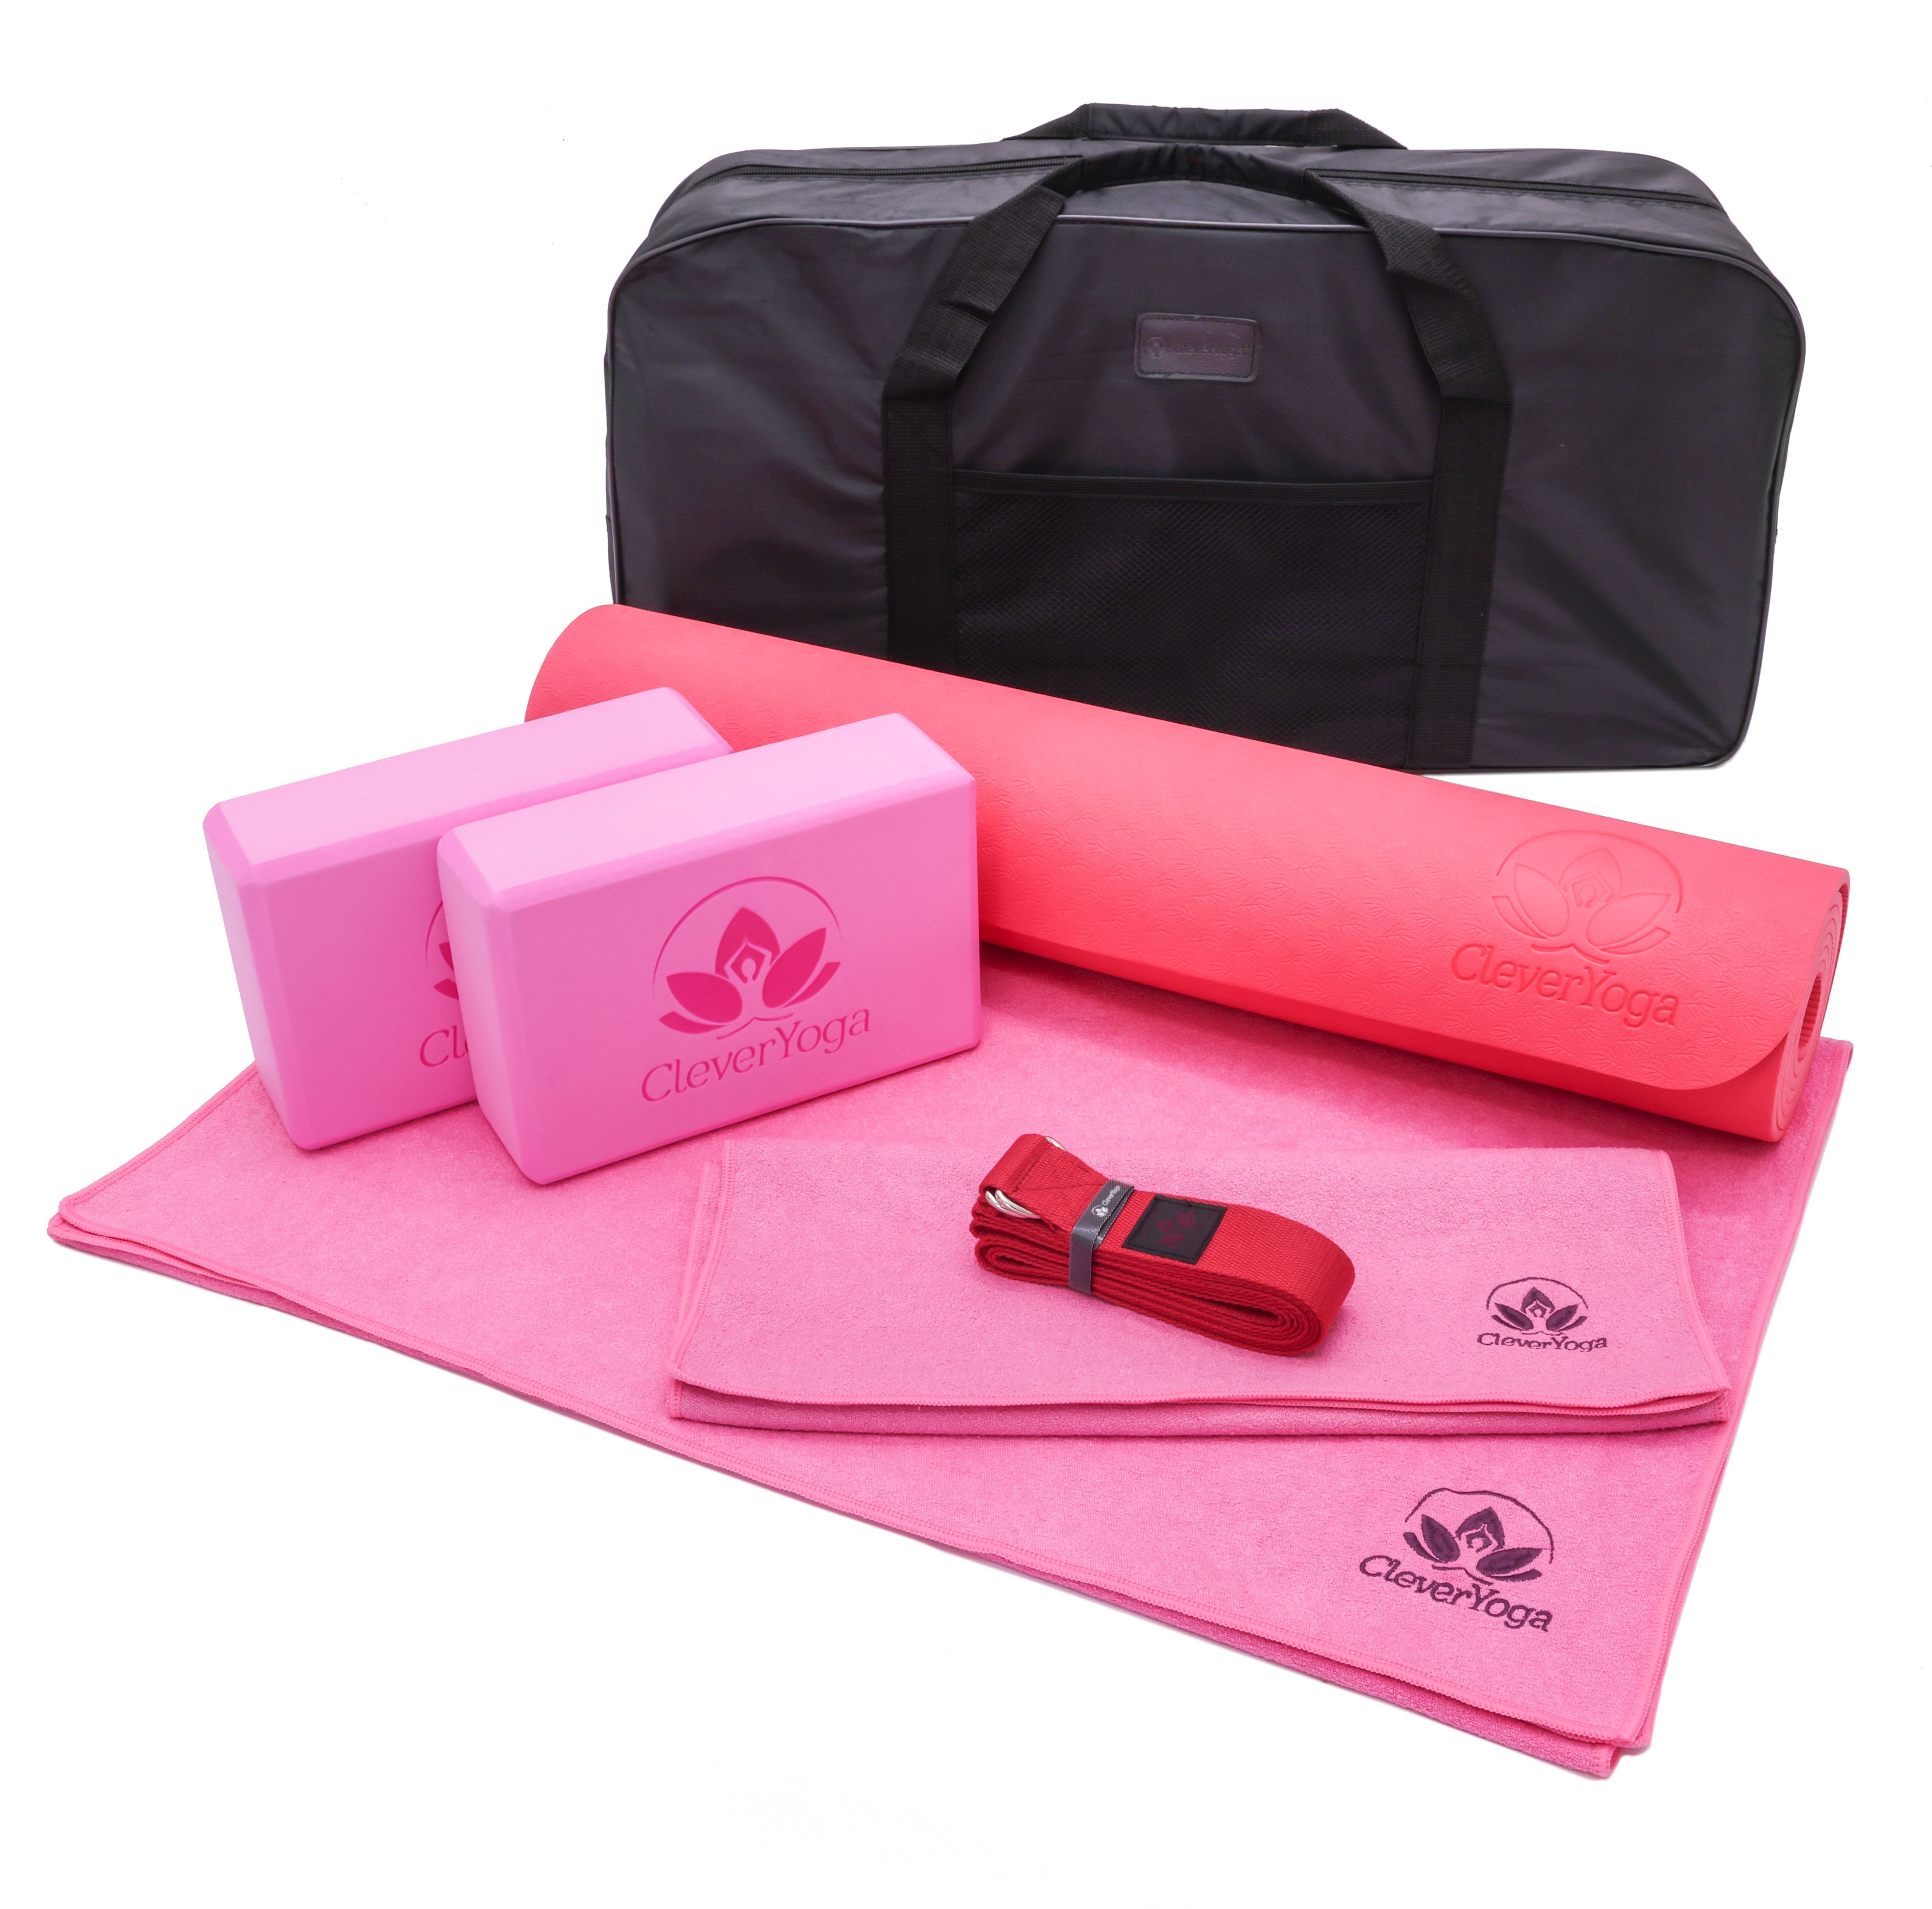 10 Pcs Yoga Starter Kit Include Yoga Mat with Carry Strap, 2 Yoga Blocks,  Yoga Strap, Yoga Pilates Ball, 5 Resistance Bands with Air Pump Yoga Mat Set  and Kit for Beginners